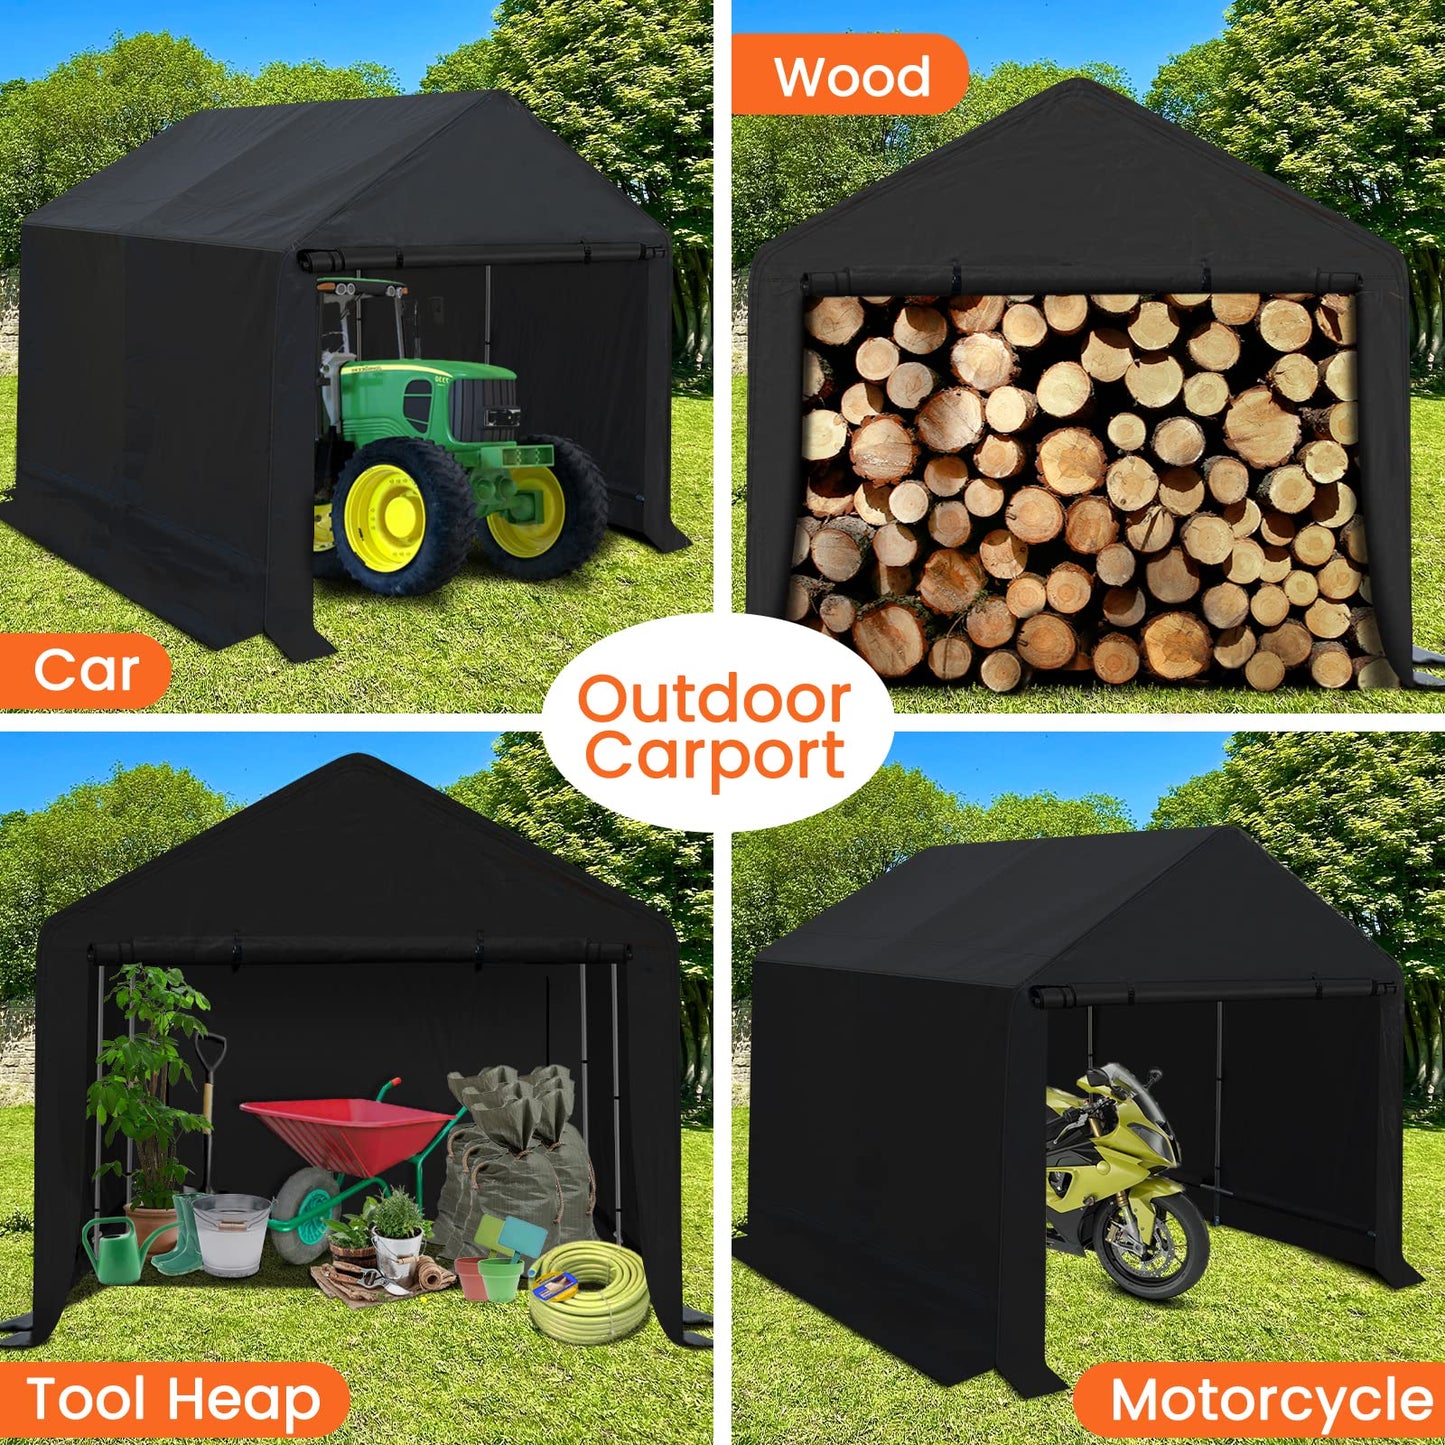 Outdoor 6x8 ft Storage Shed, Canopy Carport Heavy Duty Metal Frame Shelter Tent with Waterproof, UV Resistant Cover, 2 Rollup Zipper Doors for